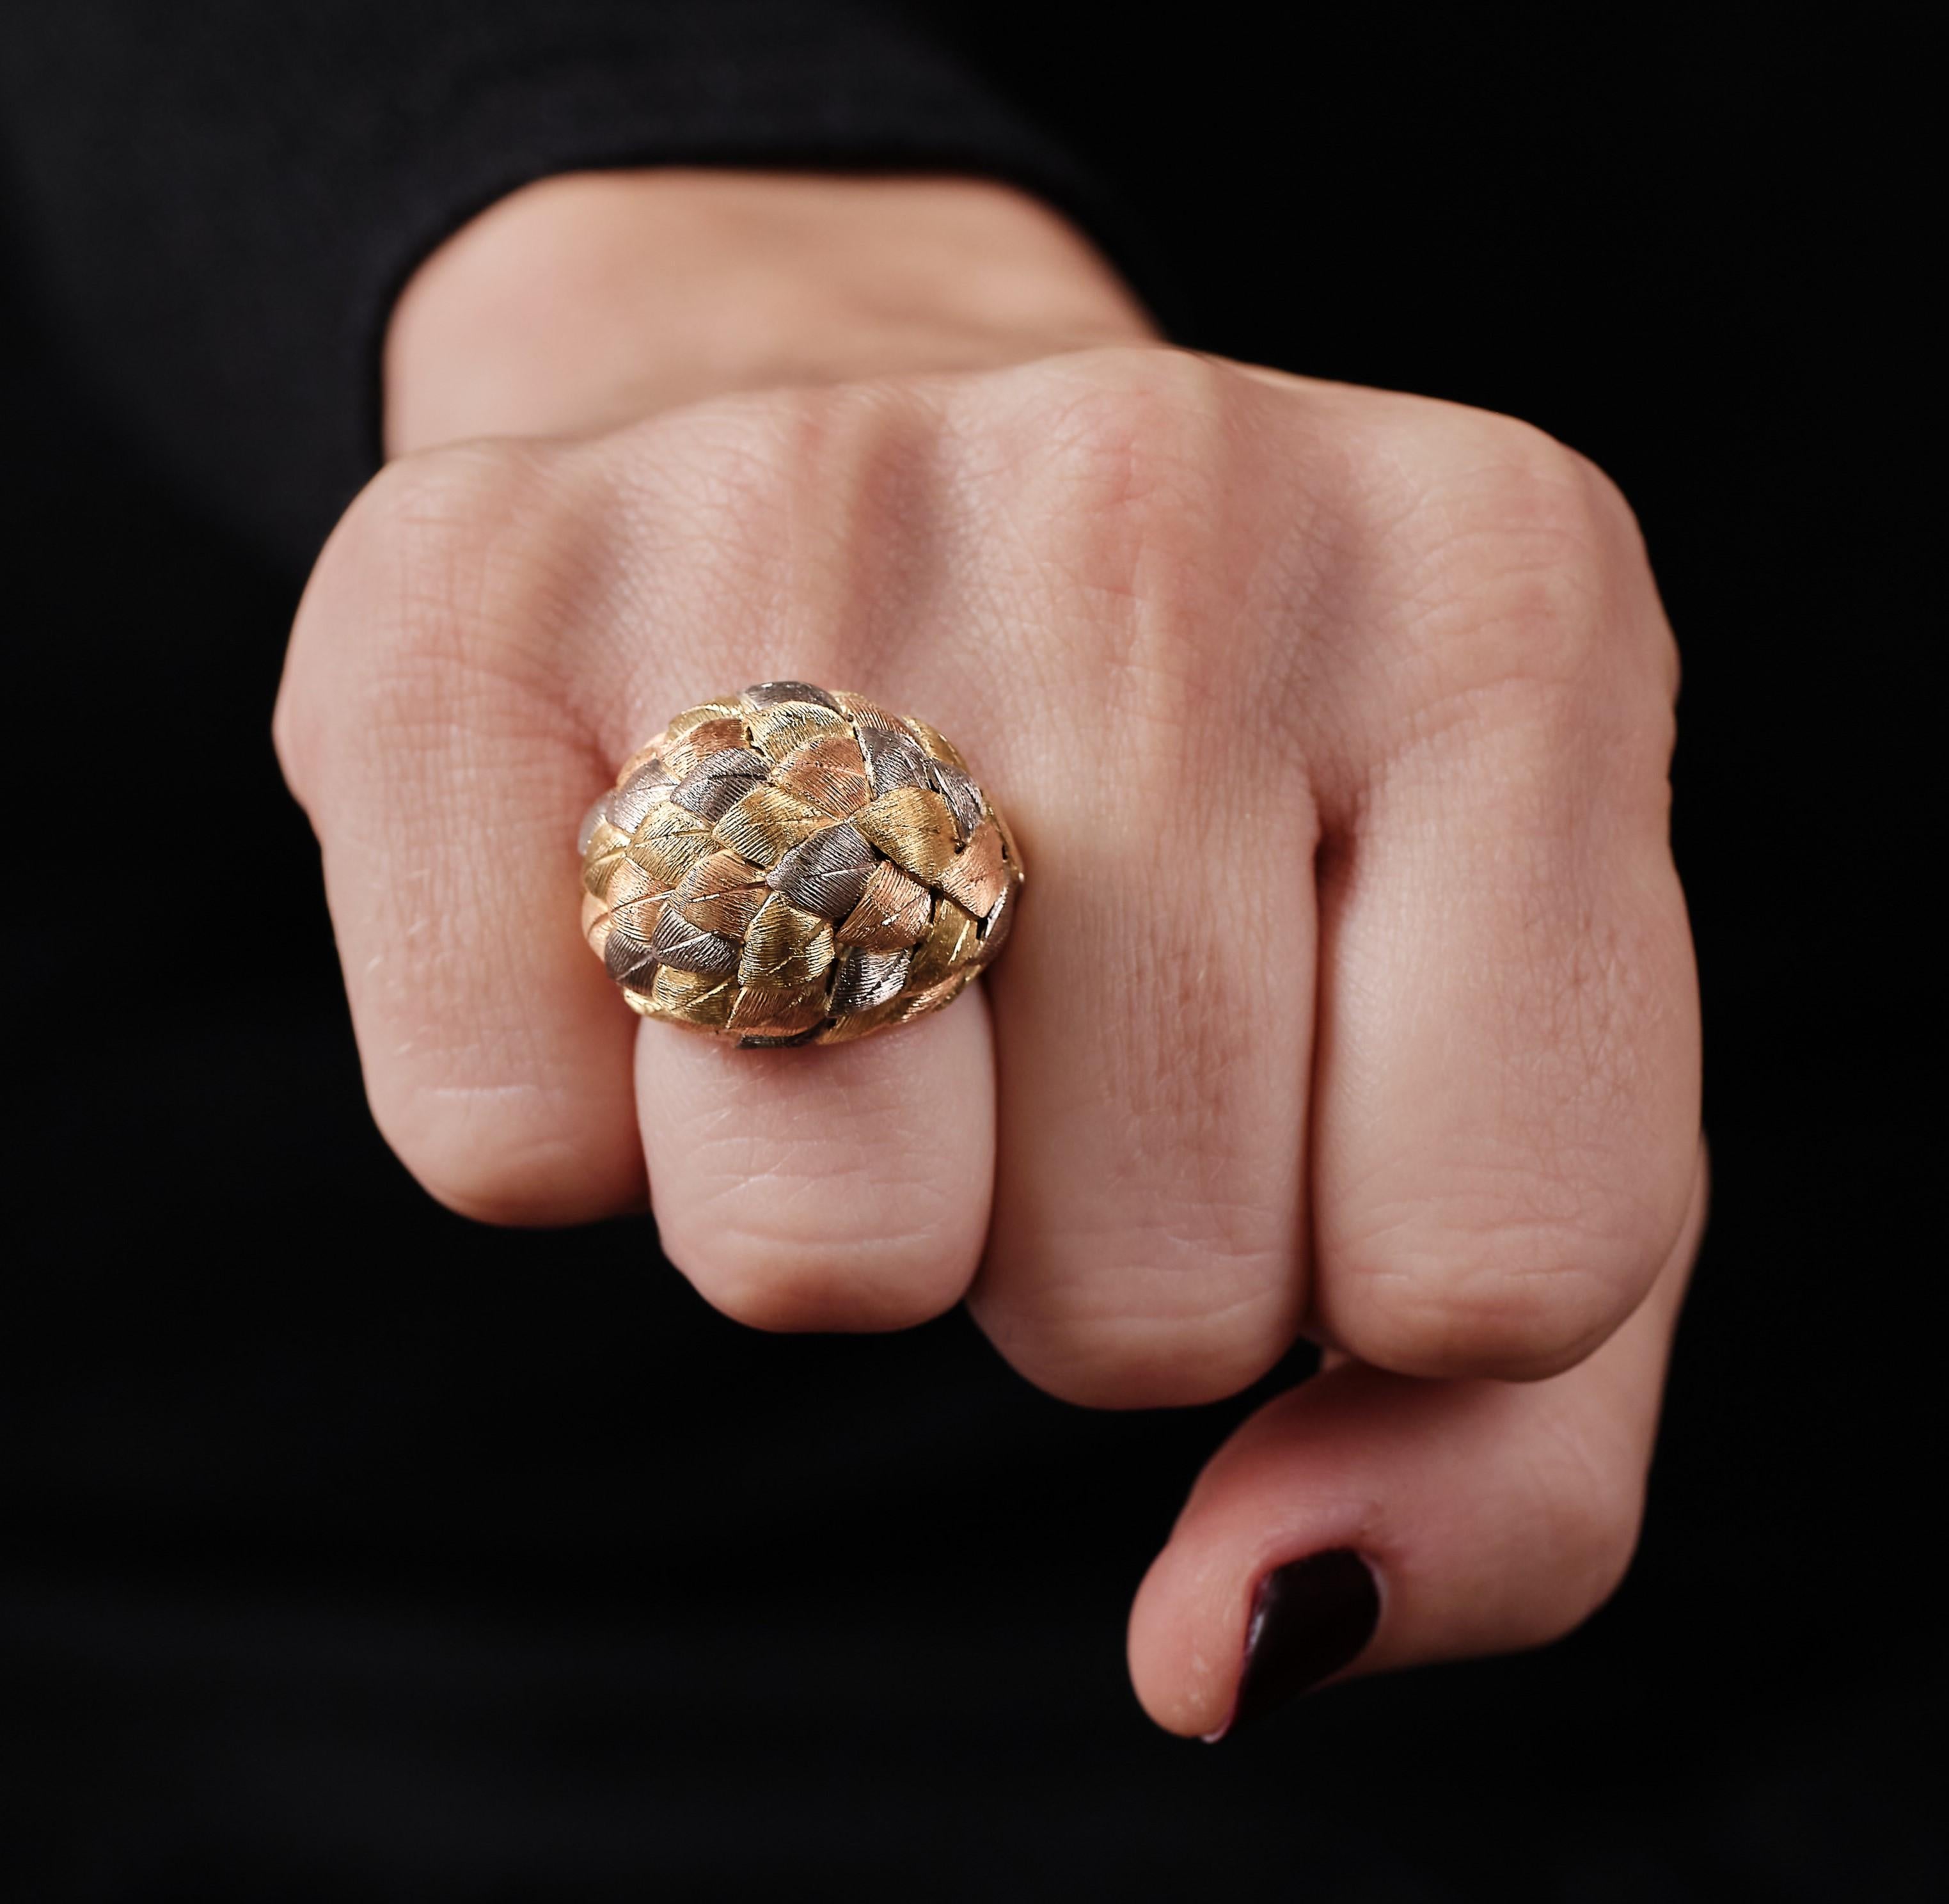 Talk about attention grabbing dress ring. 18kt yellow gold ring with an elegant leaf motif. The surface of the leaves are delicately enhanced with fine line engraving. Giving it a harmonious  and detailed textured surface in alternating gold color.